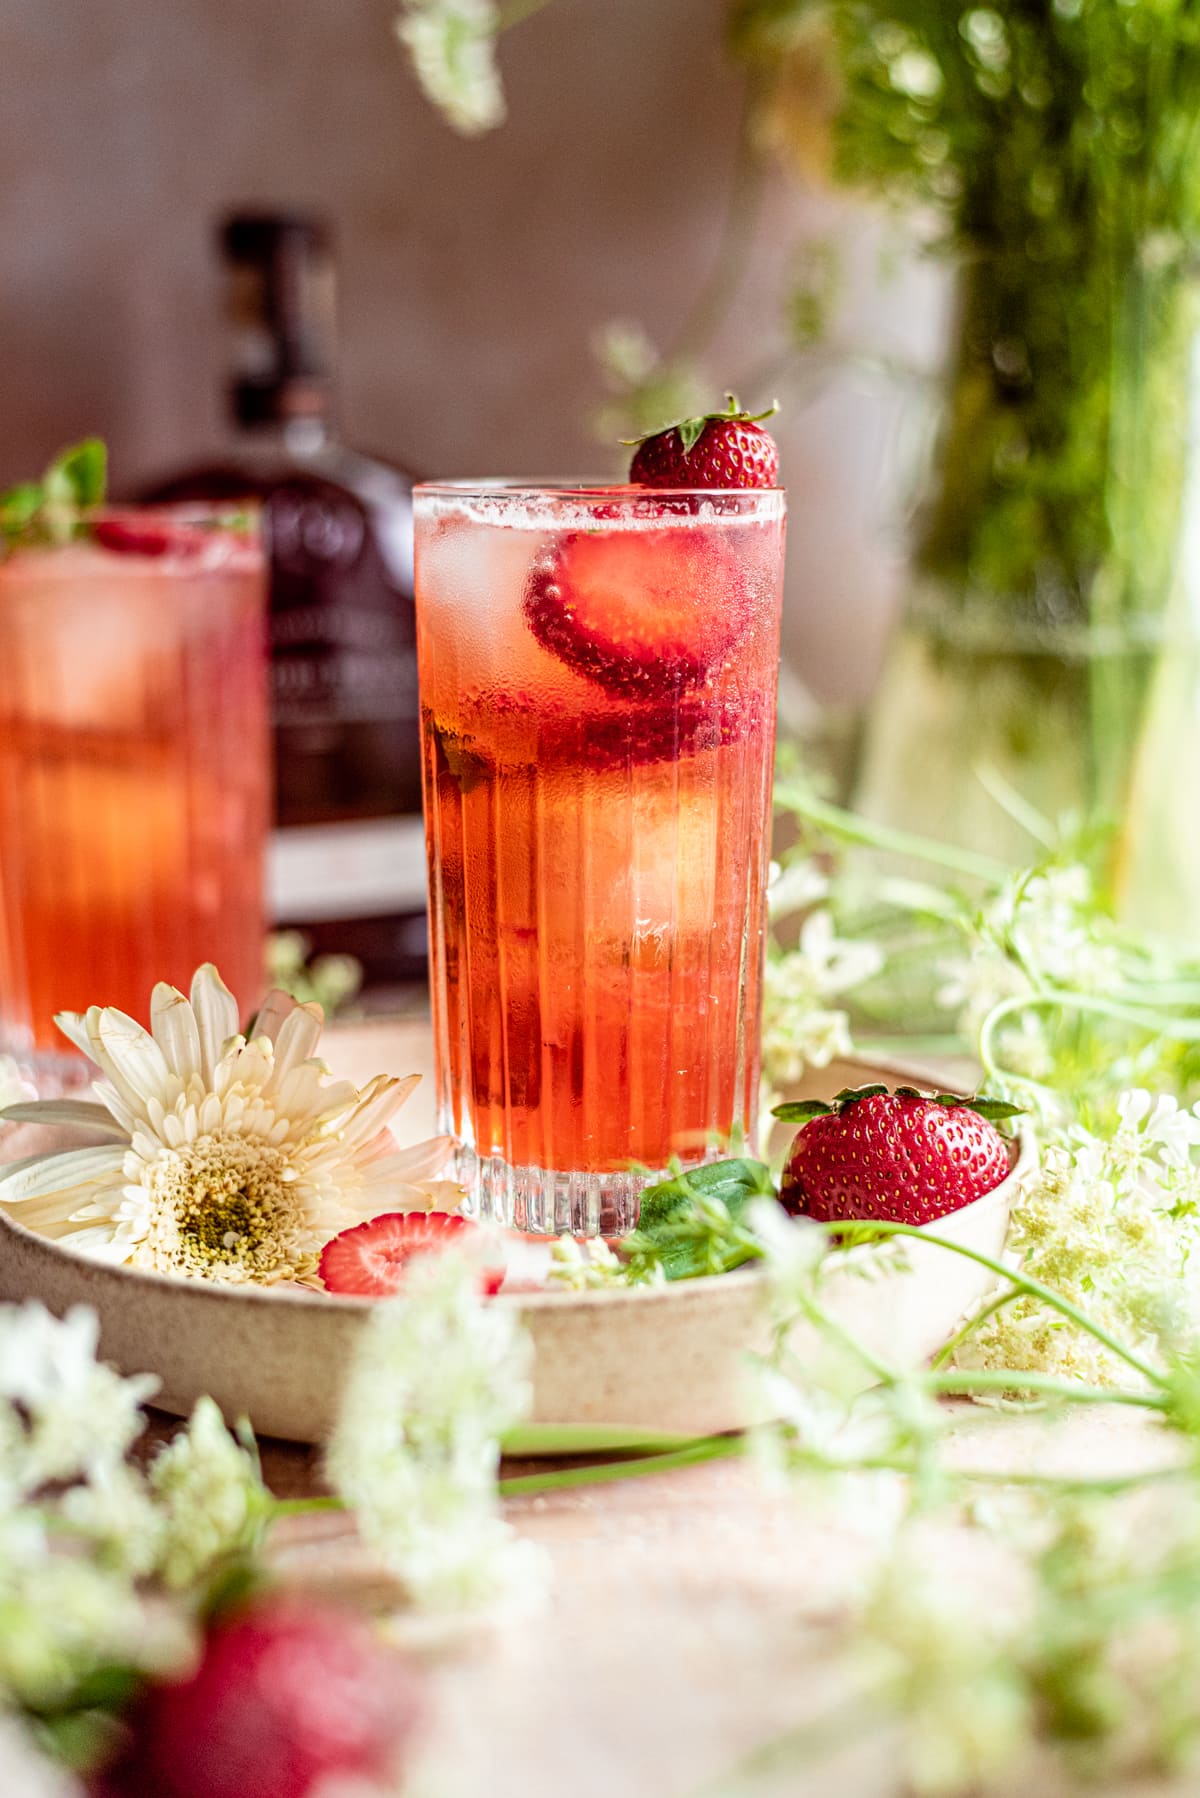 Strawberry bourbon cocktail in a highball glass garnished with strawberry slices and surrounded by white flowers.